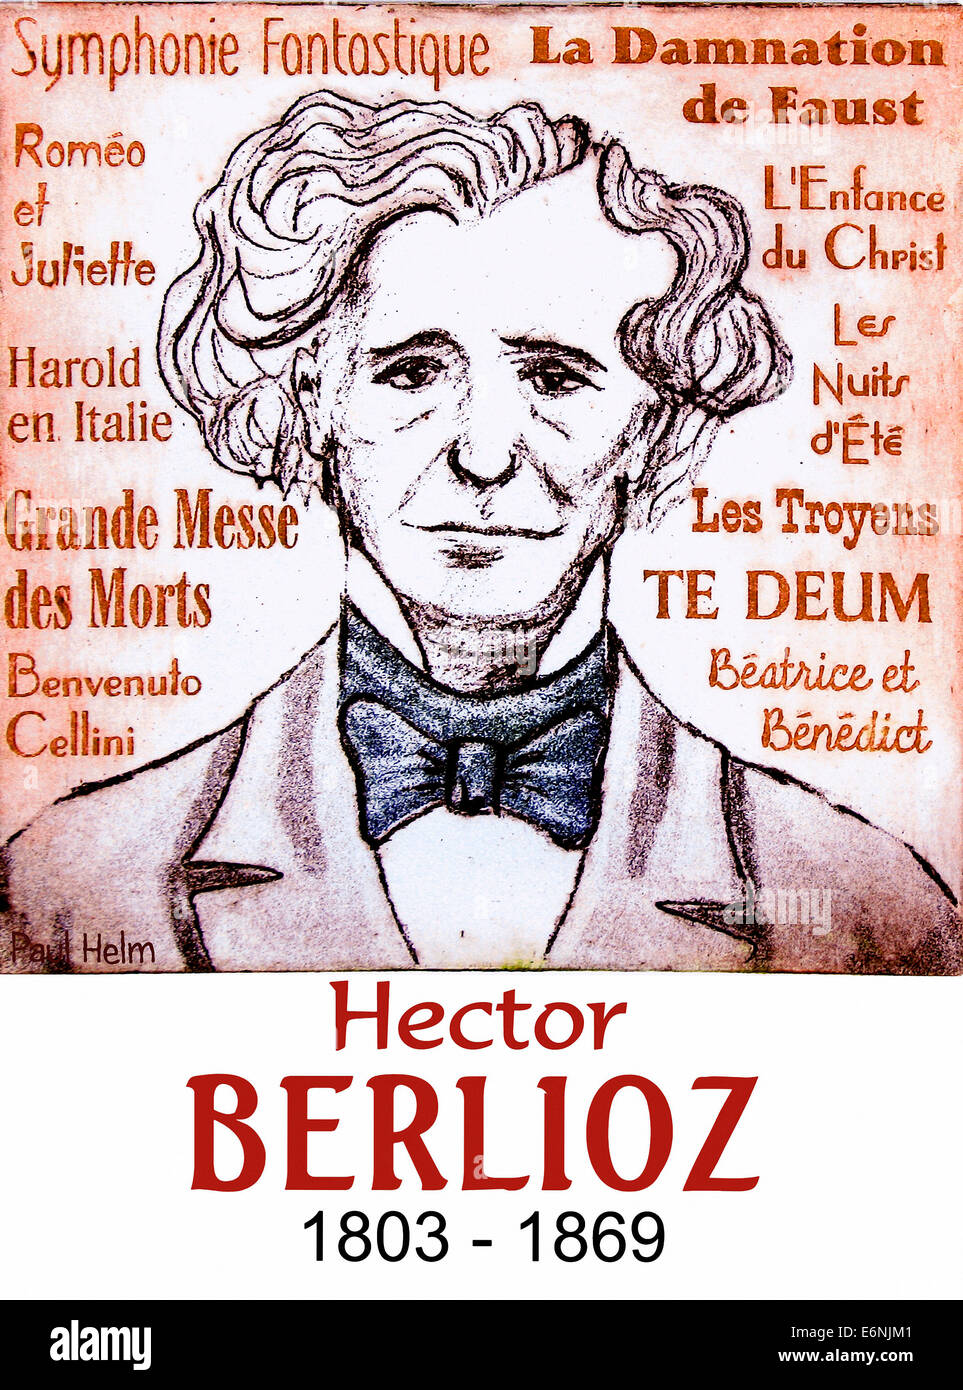 Hector Berlioz, 1803 - 1869, French composer, portrait, conductor, writer and music critic Stock Photo - Alamy